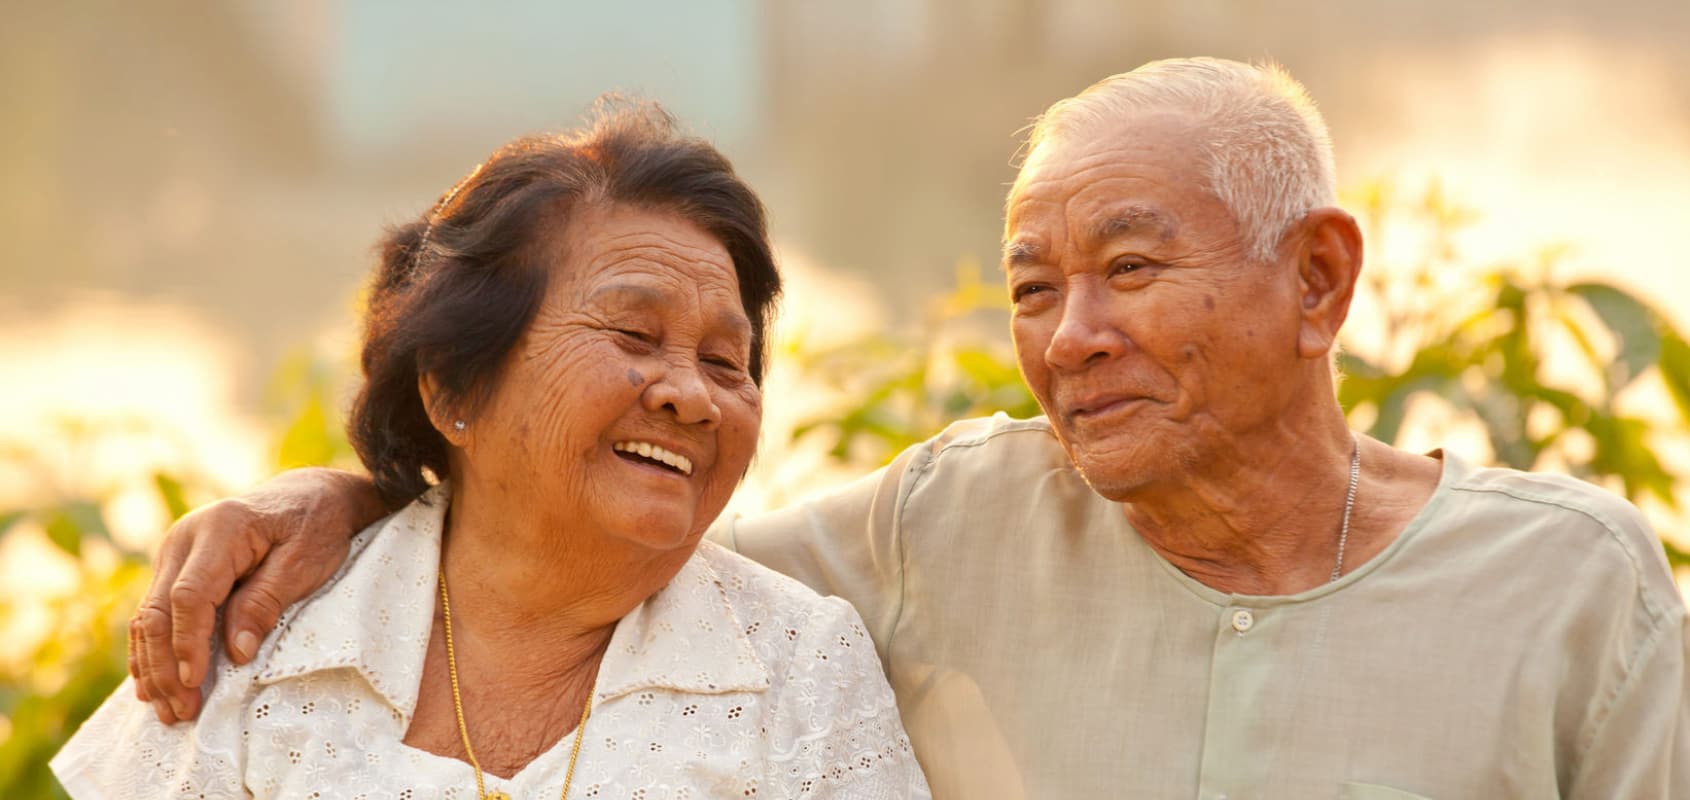 Happy senior asian couple enjoying their golden years, smiling and laughing